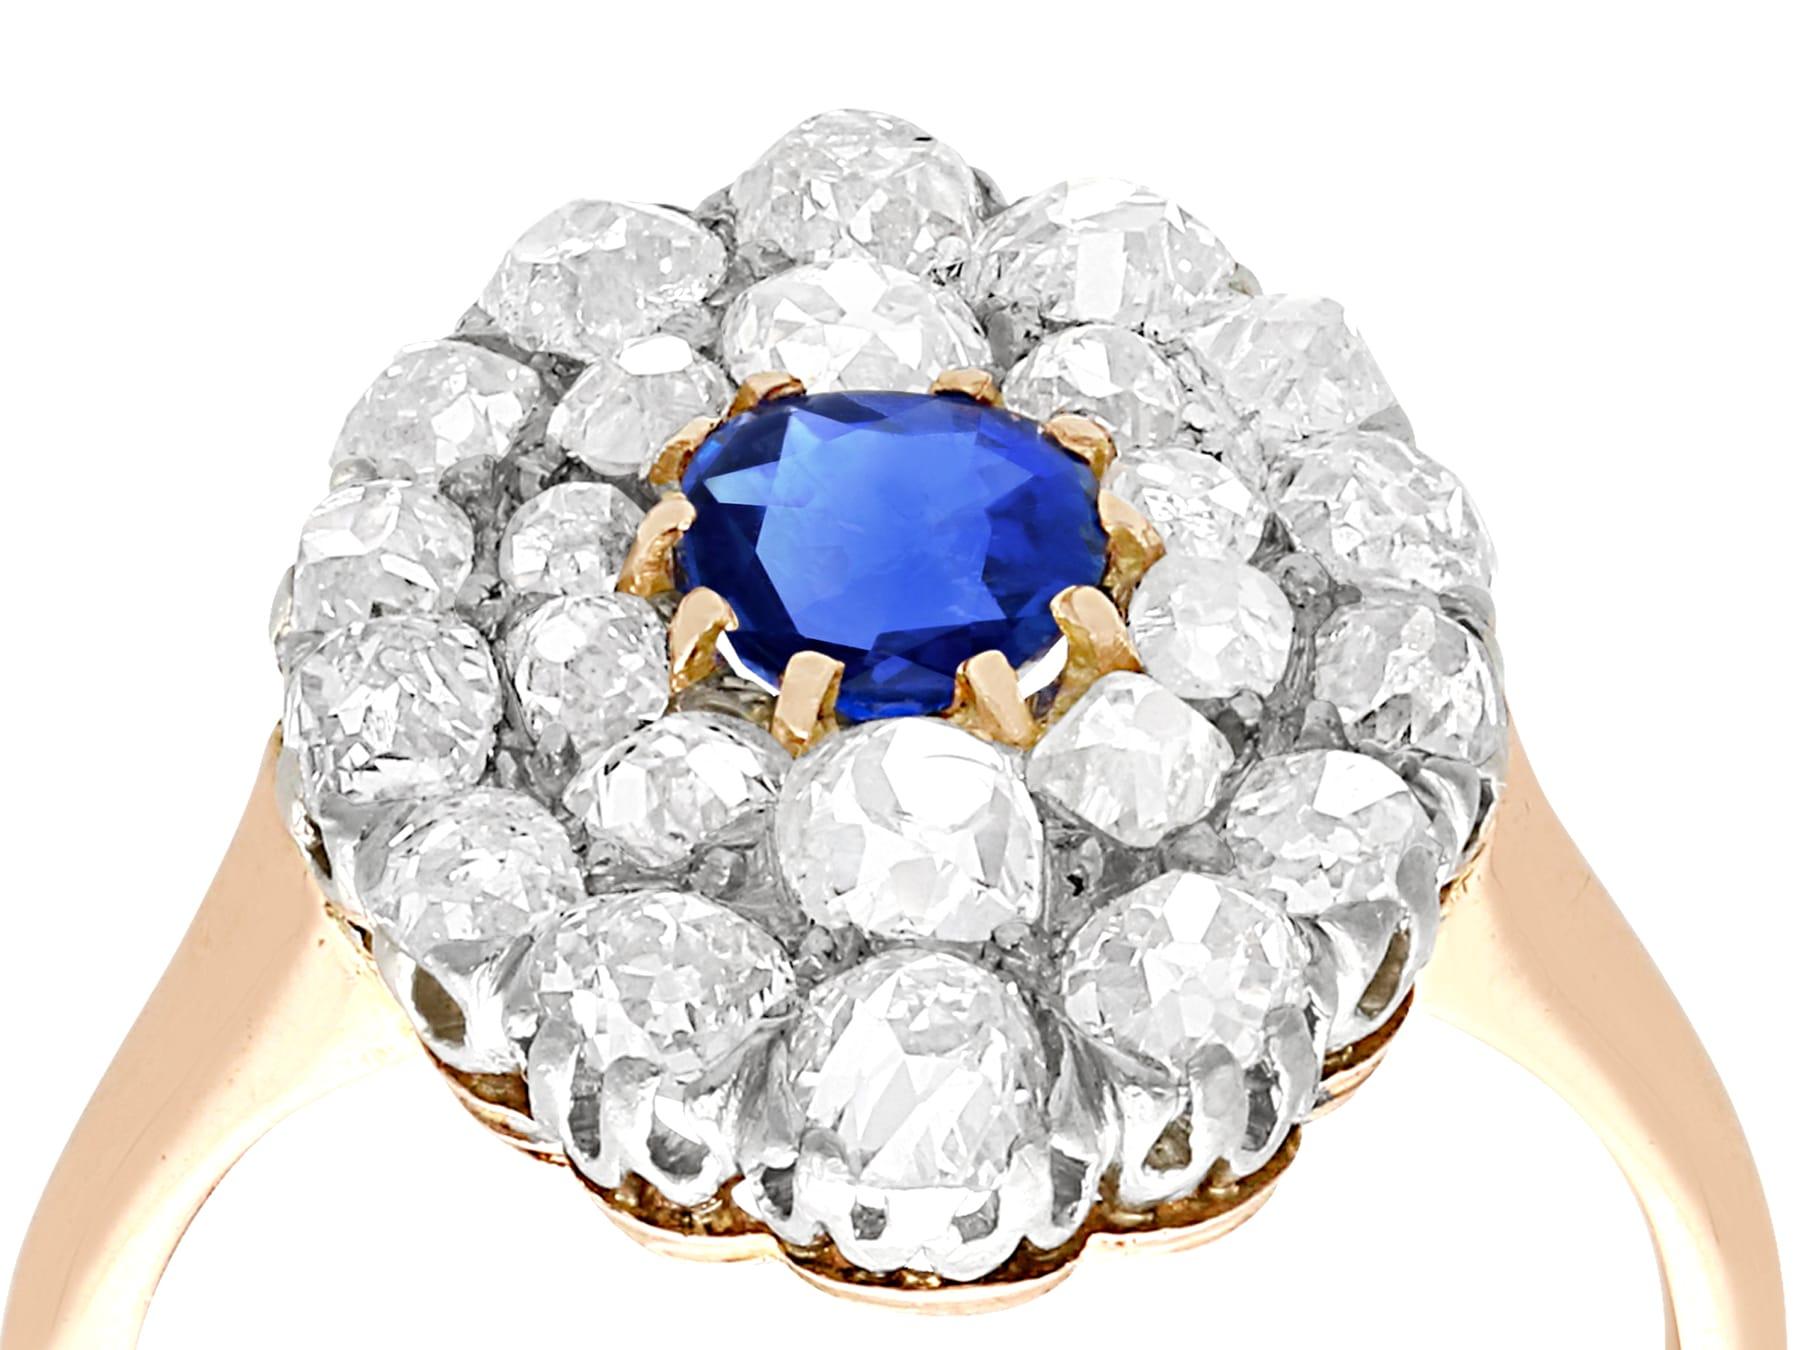 A stunning, fine and impressive antique 0.45 carat blue sapphire and 2.76 carat diamond, 18 karat rose gold and platinum set cluster ring; part our antique jewelry and estate jewelry collections.

This stunning antique blue sapphire ring has been